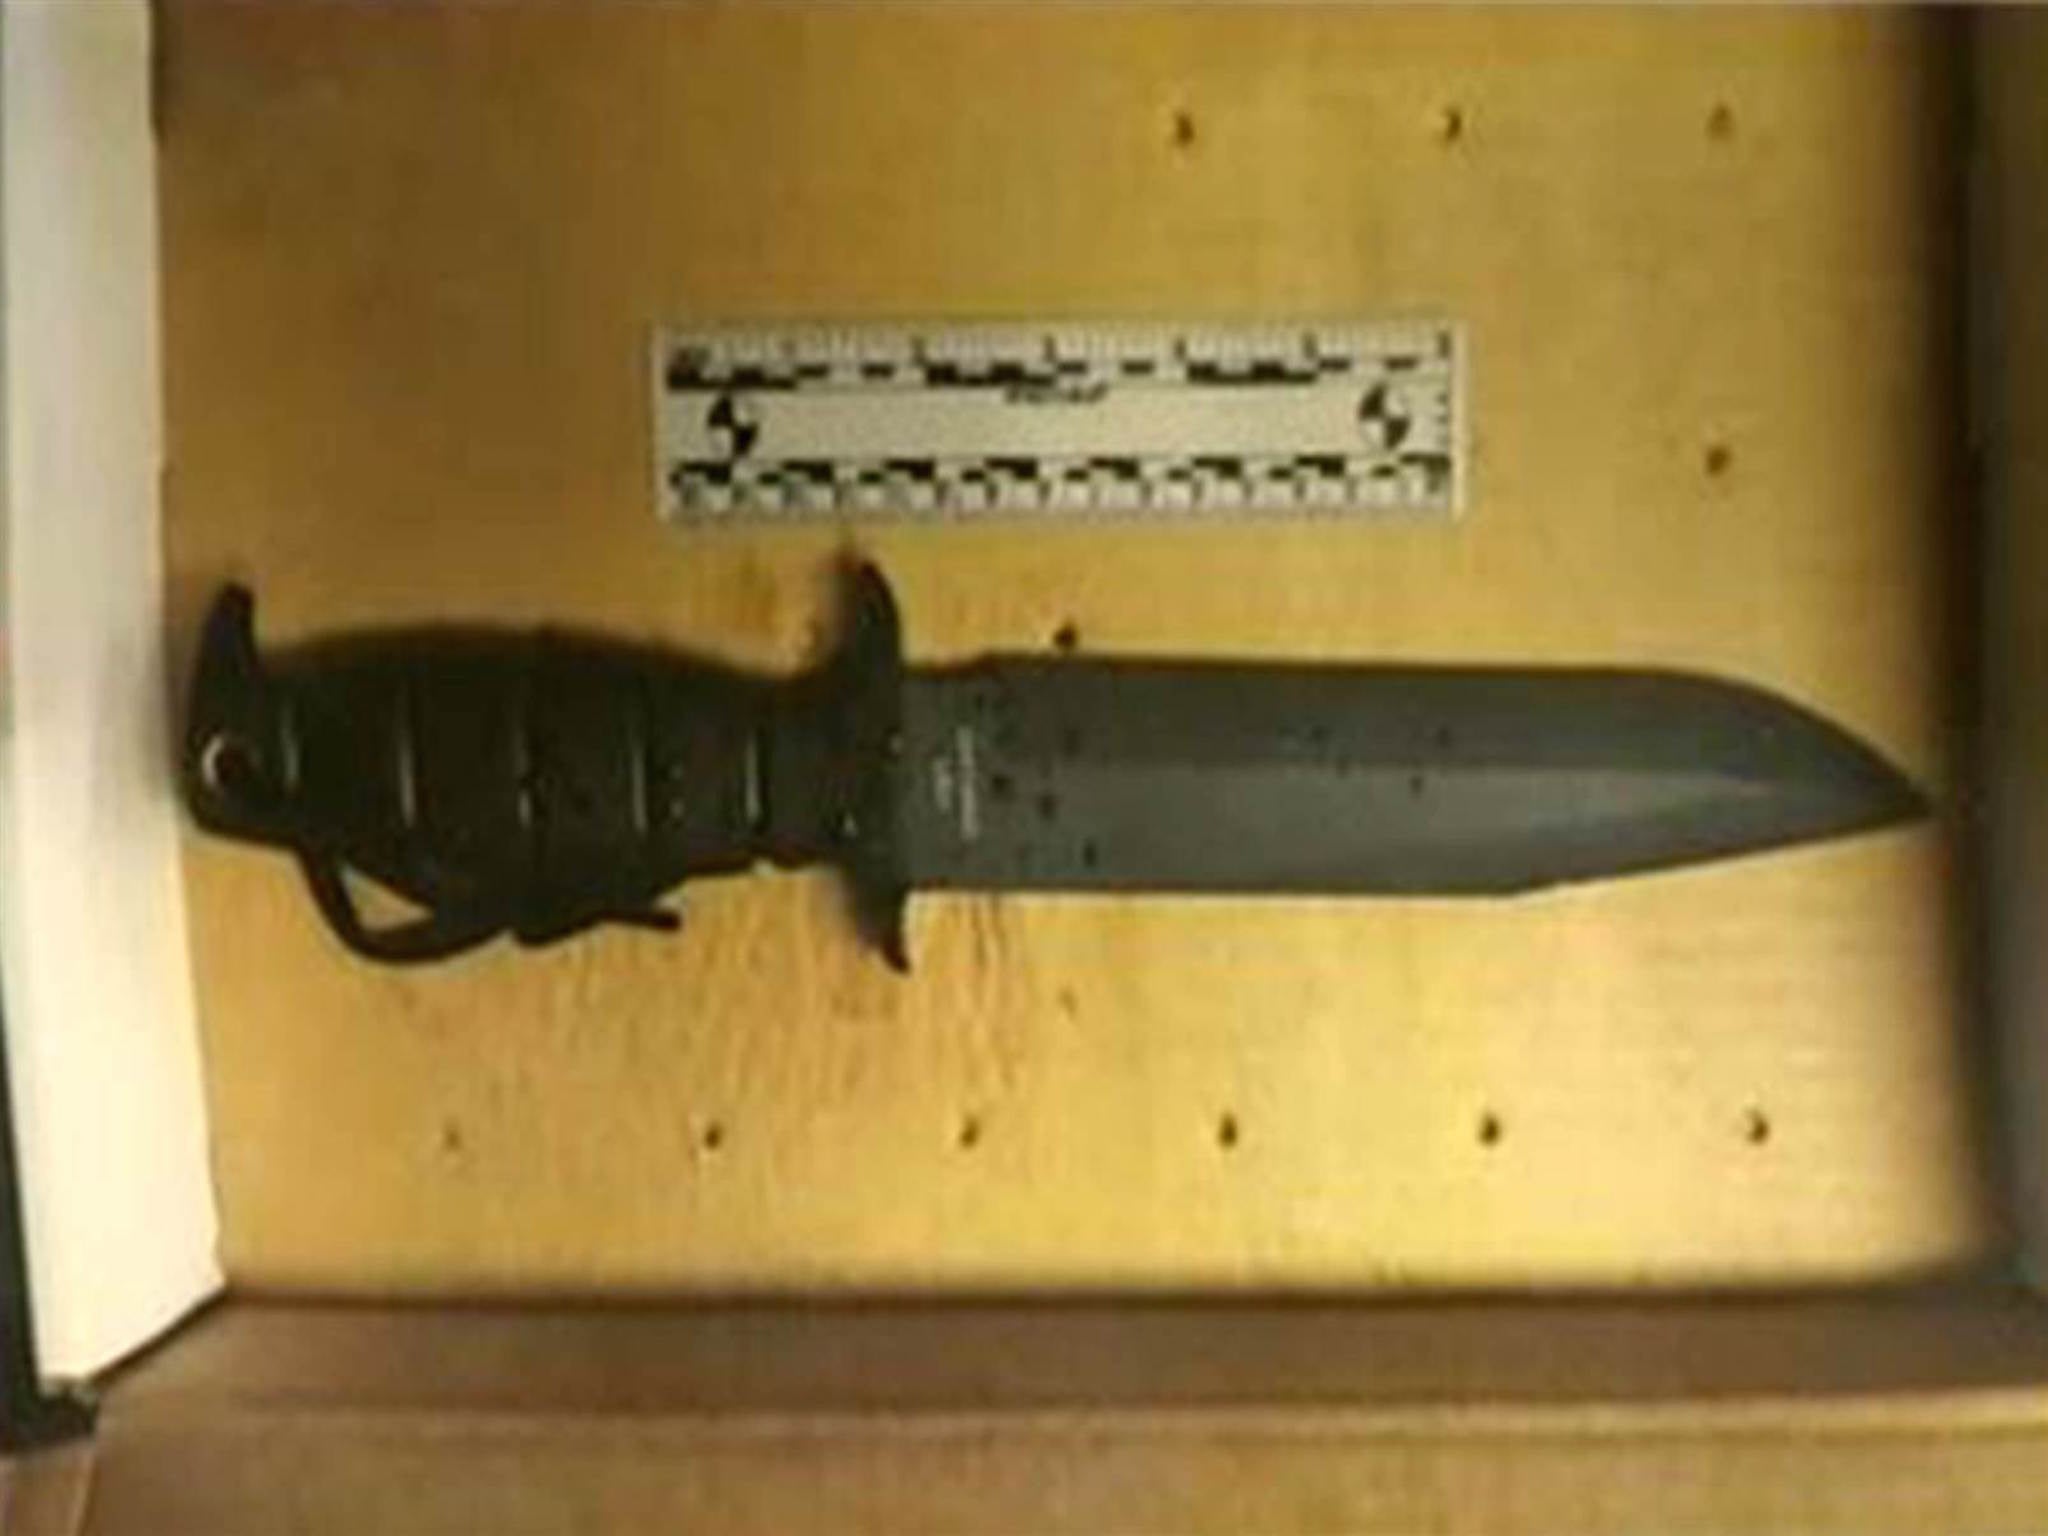 This is the knife reportedly recovered from the body of Usaamah Rahim